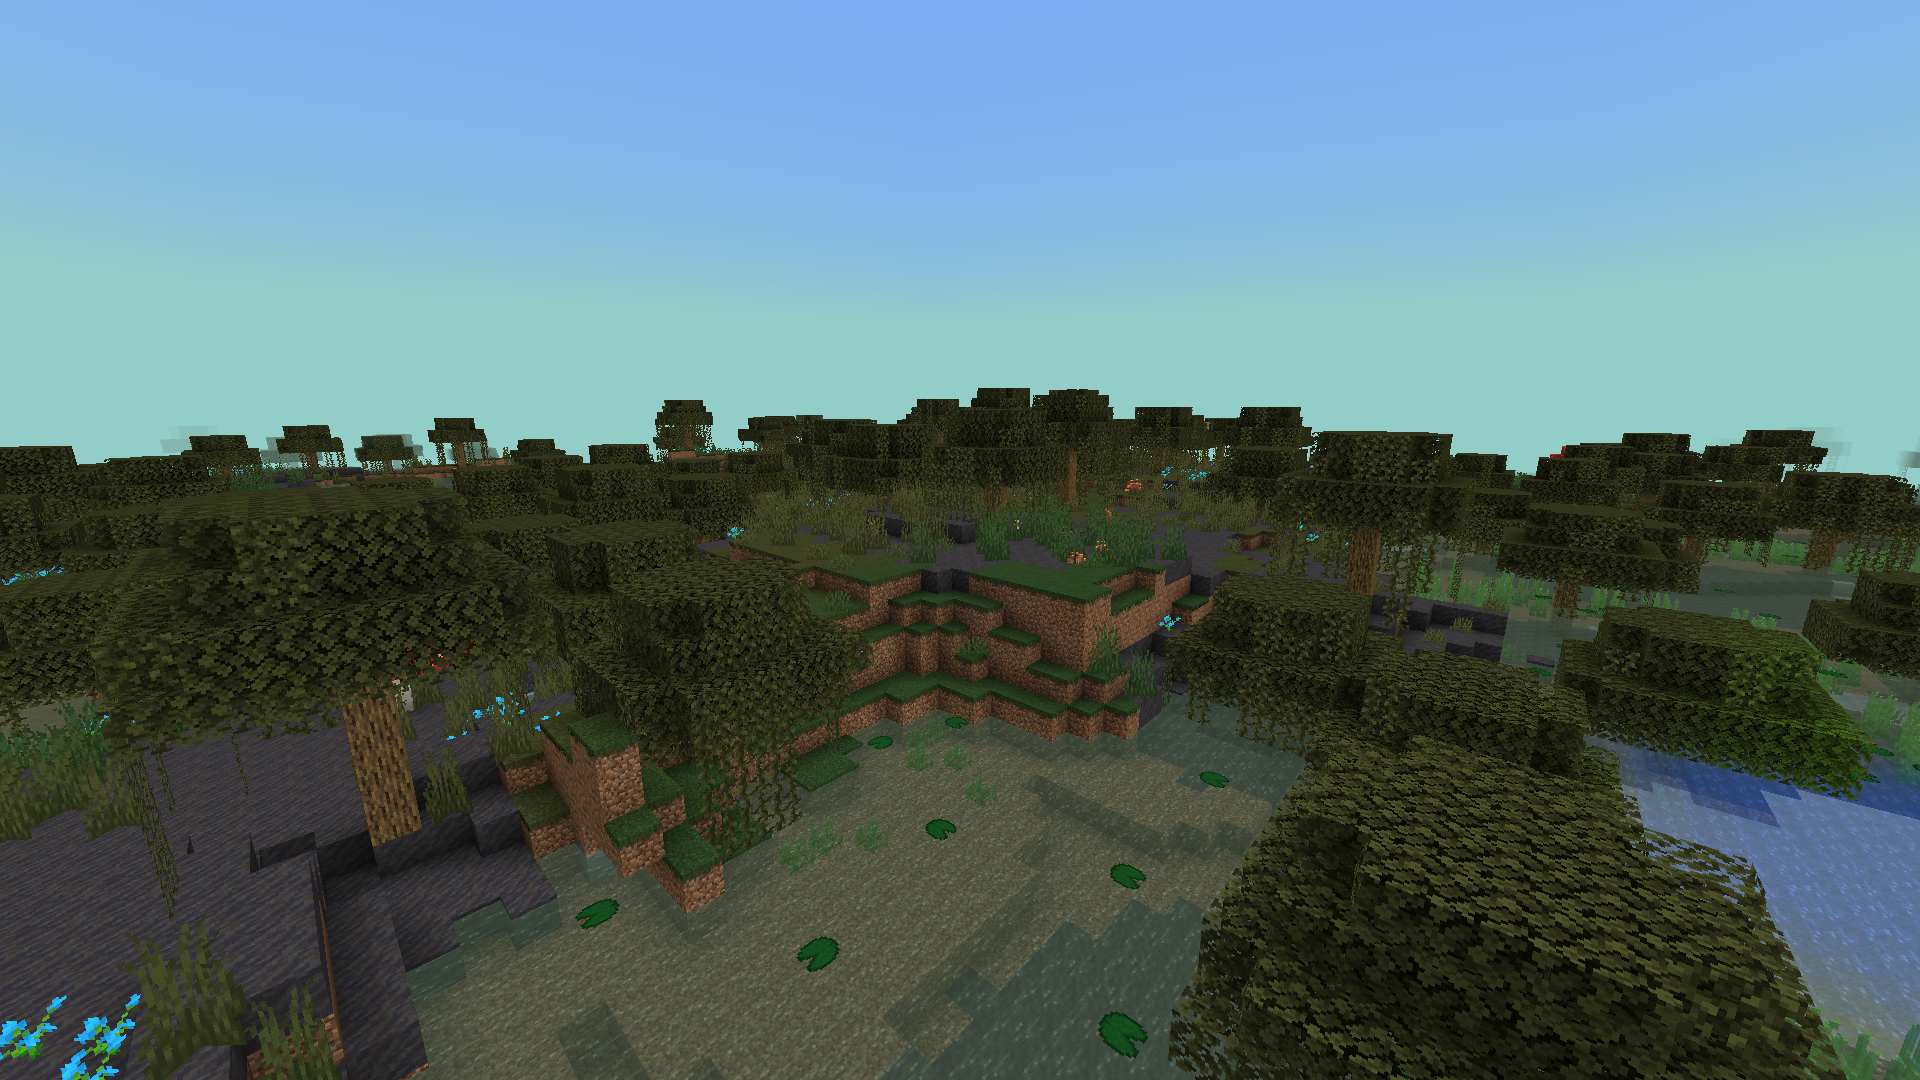 An overhauled swamp, now using mud and new sky colors.